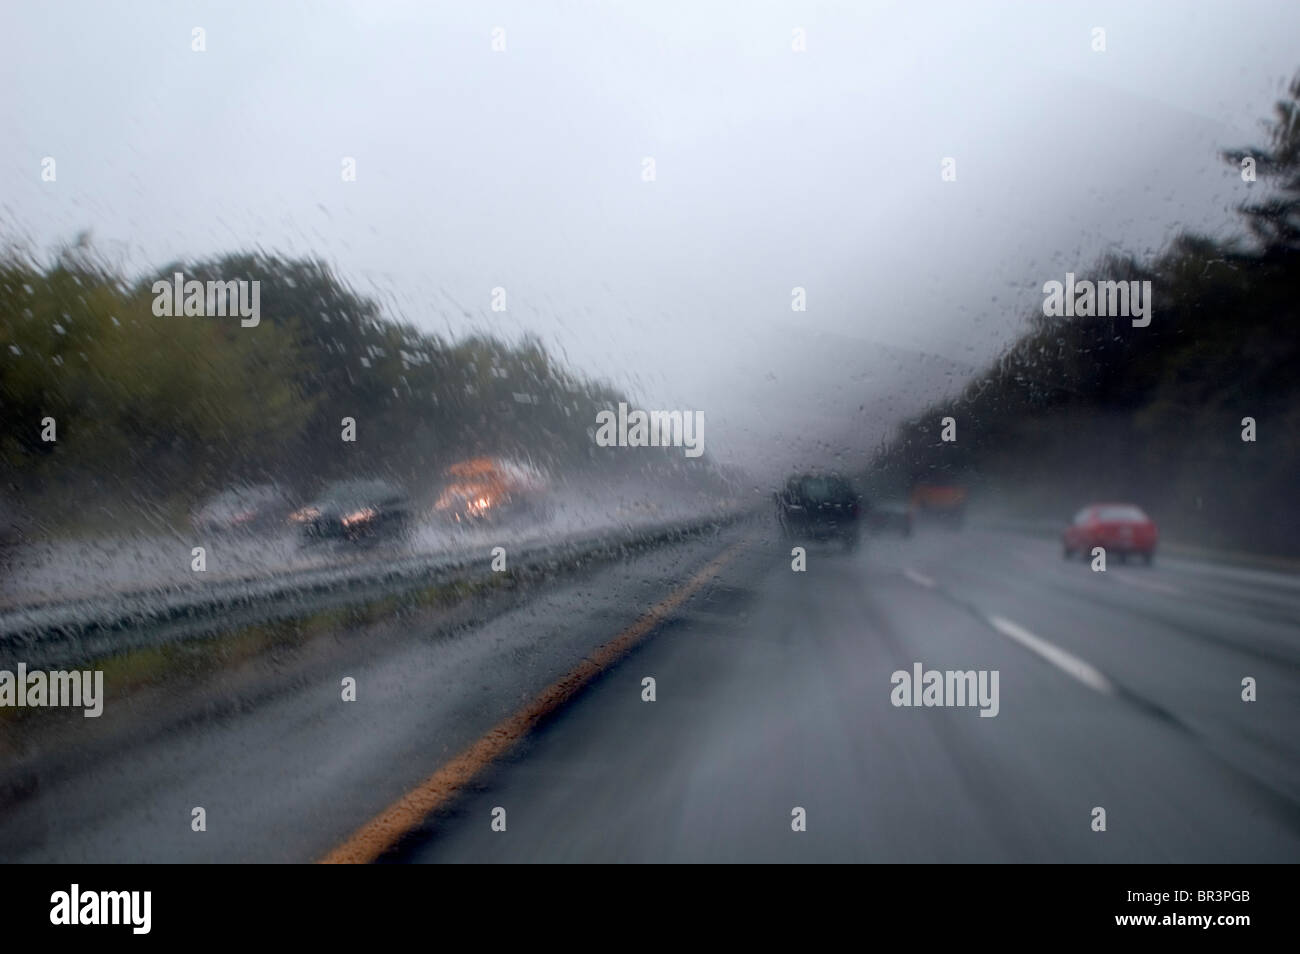 Highway traffic in poor visibility Stock Photo